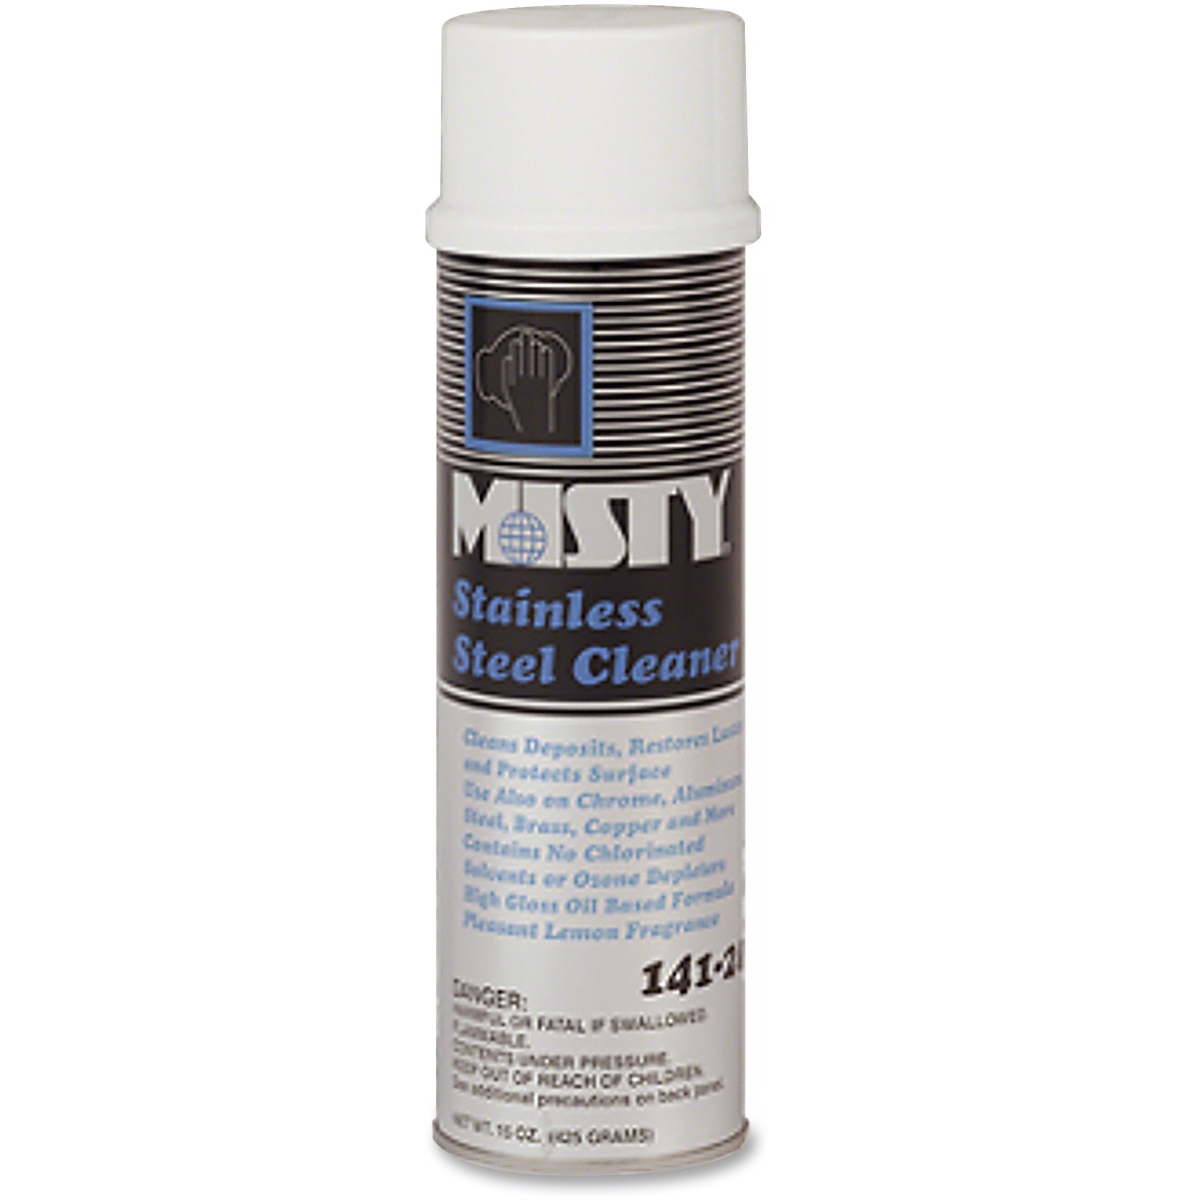 Picture of MISTY AMR1001541CT Stainless Steel Cleaner & Polish Spray - Clear